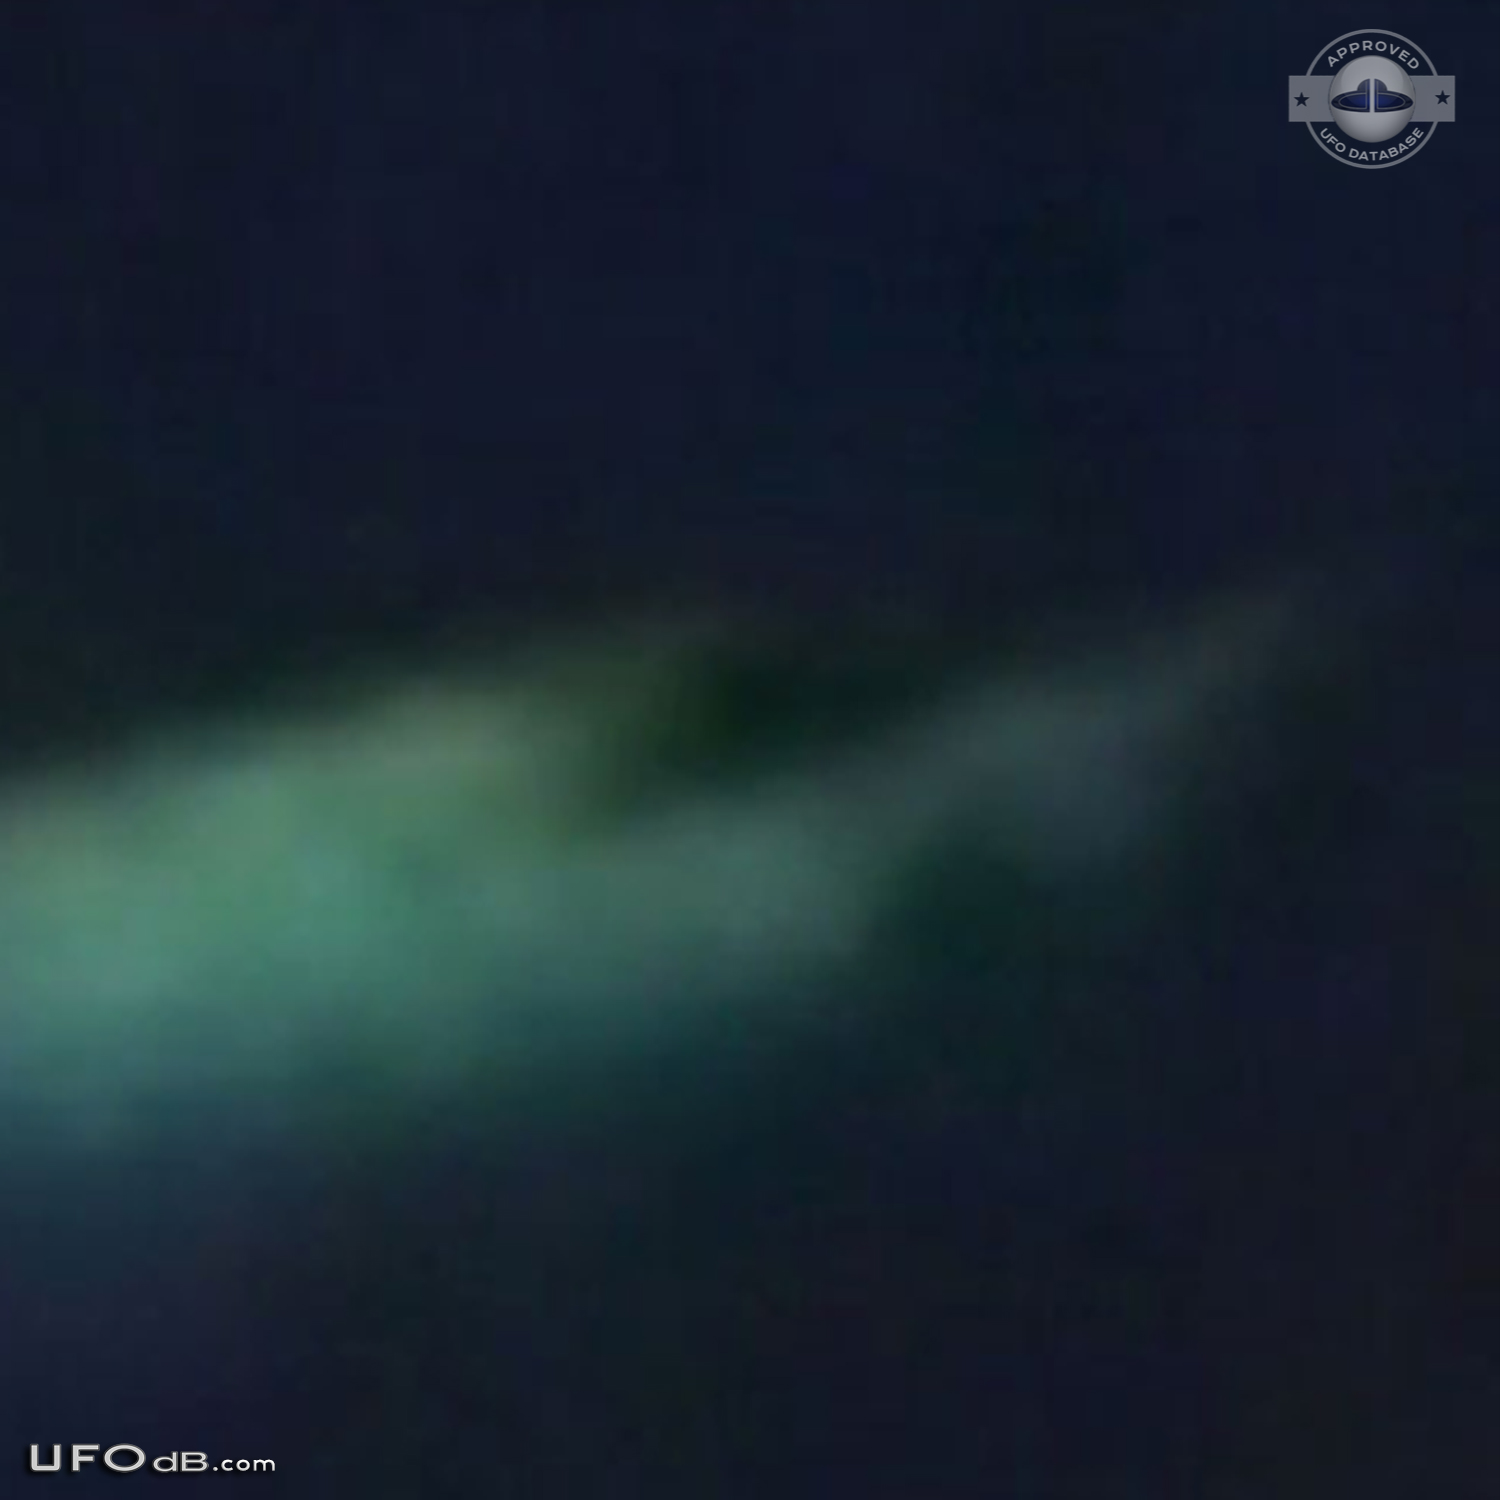 Flying Snake or Dragon UFO caught on picture in Iquique, Chile 2012  UFO Picture #421-5